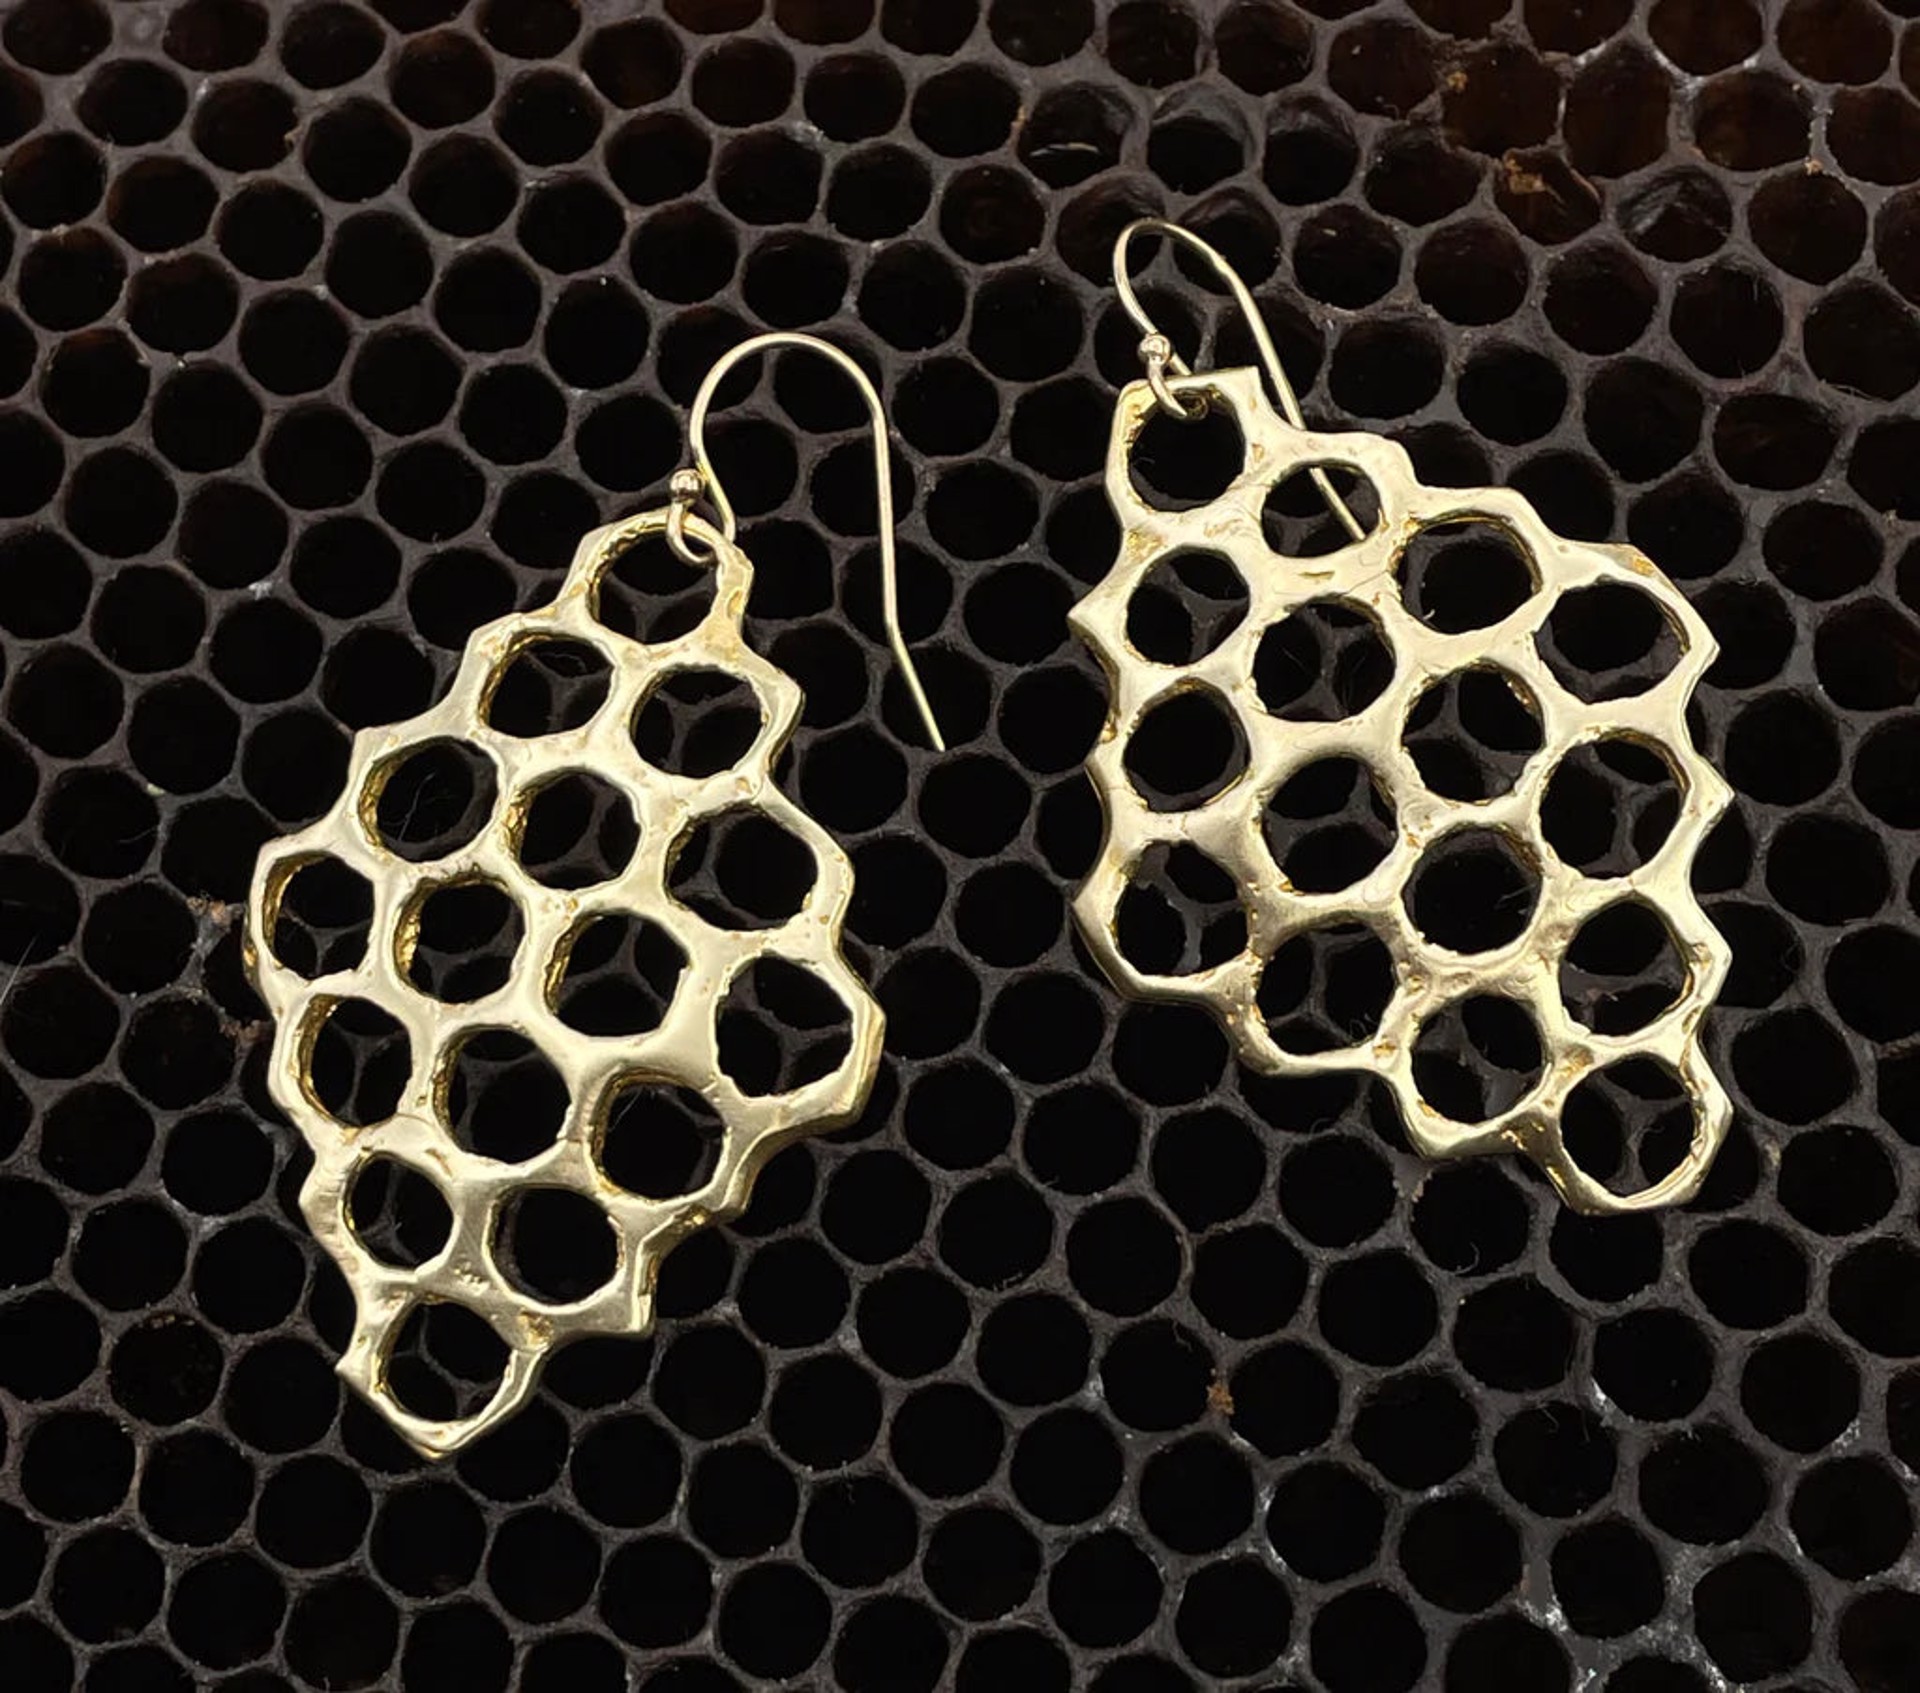 Diamond comb earrings - Bronze by Bee Amour